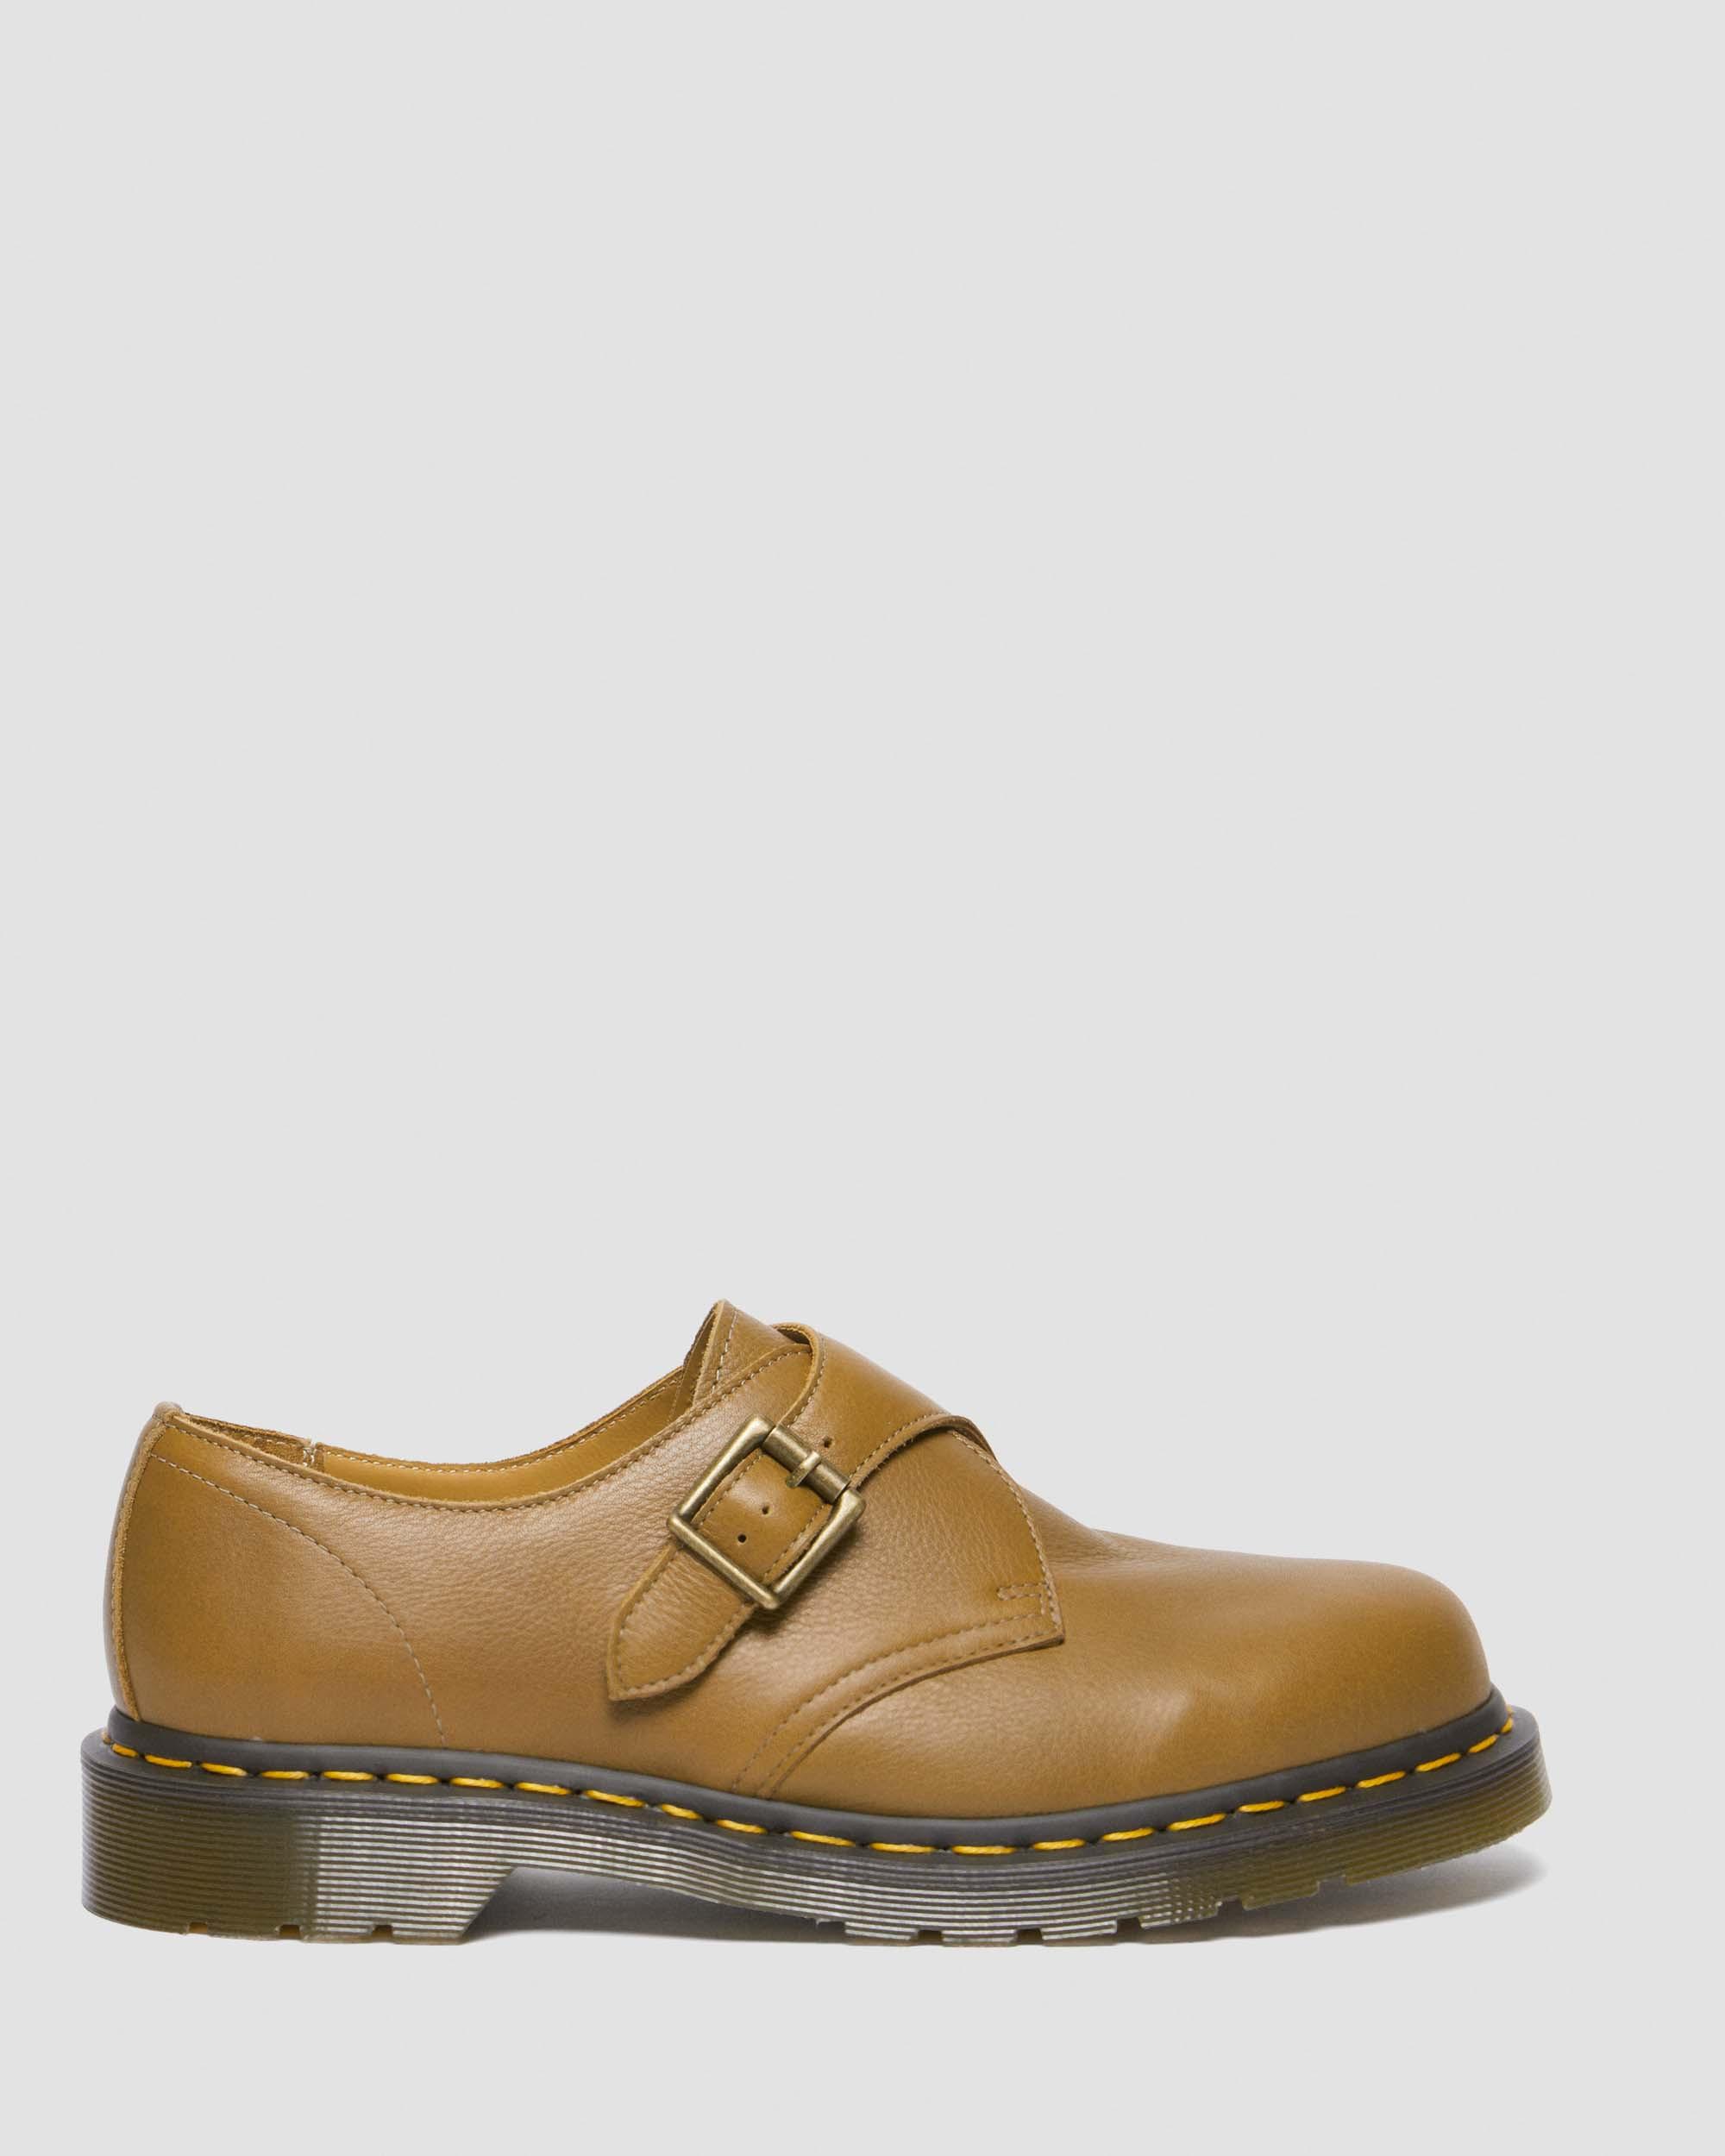 1461 Monk Buckle Leather Shoes in Dark Tan